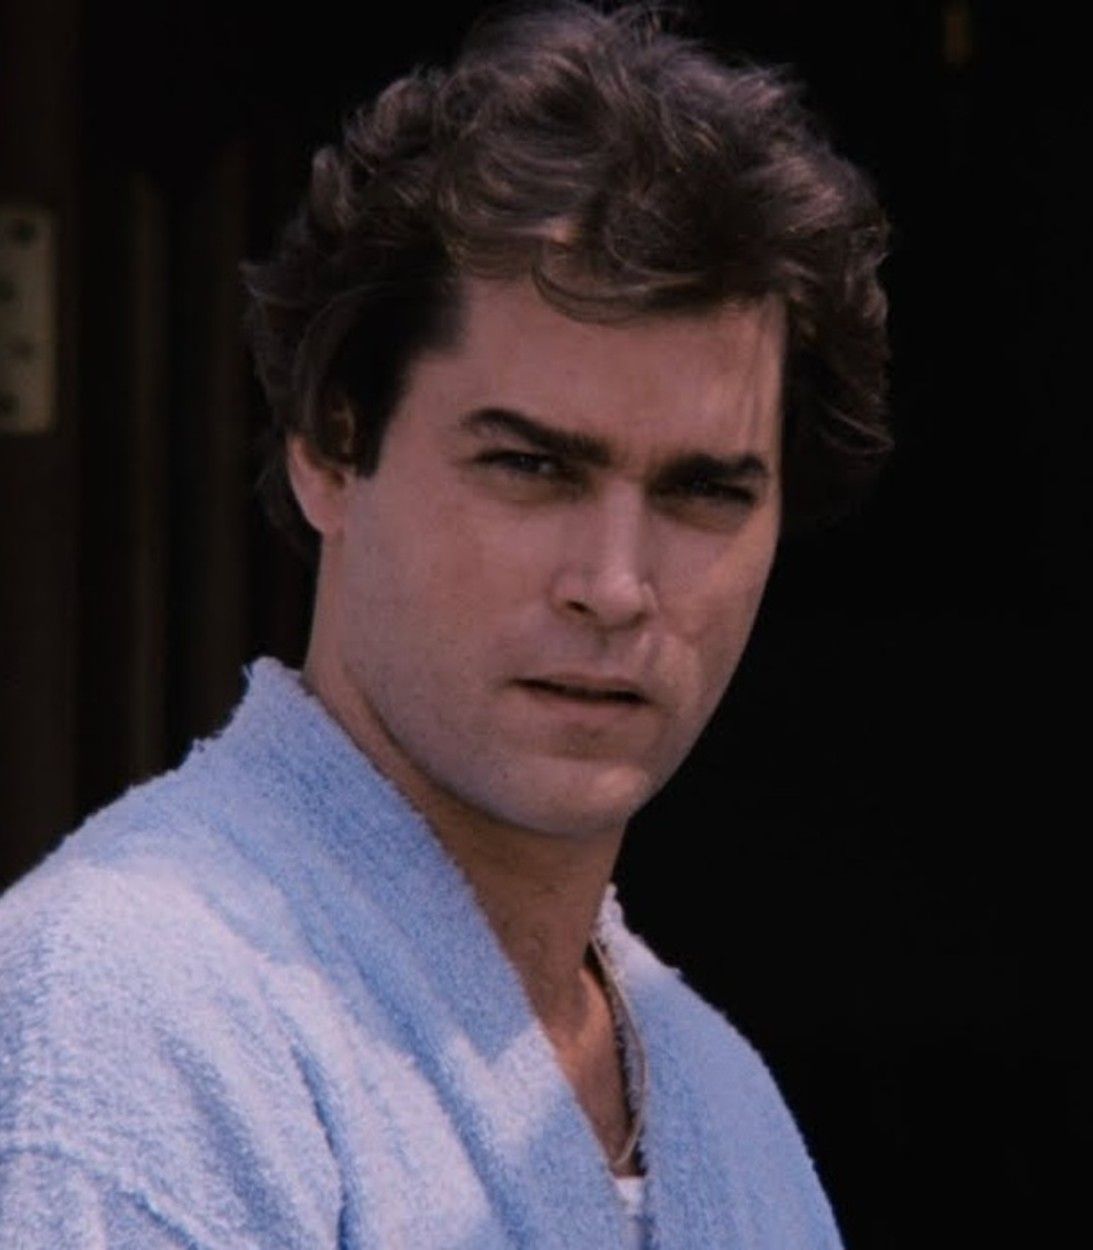 Henry Hill Goodfellas pic vertical